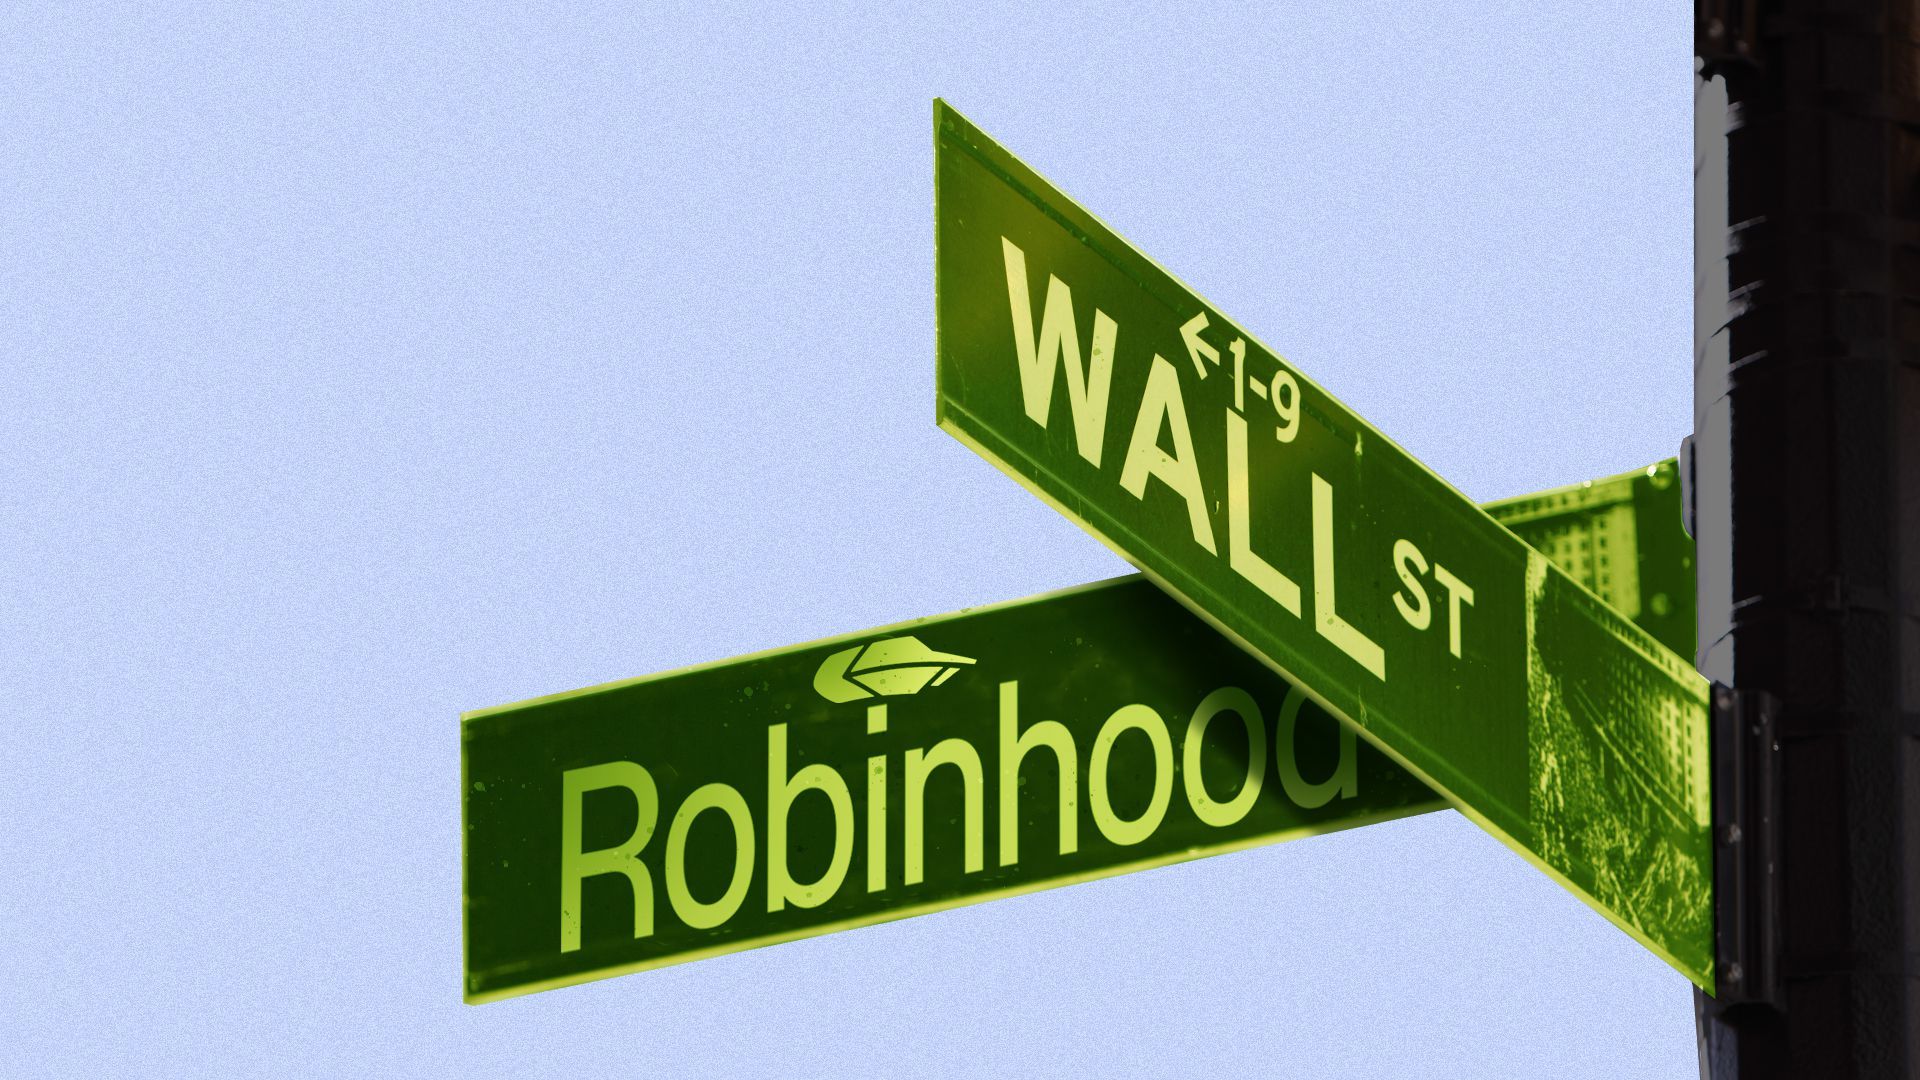 Illustration of the Wall Street sign with a Robinhood sign behind it